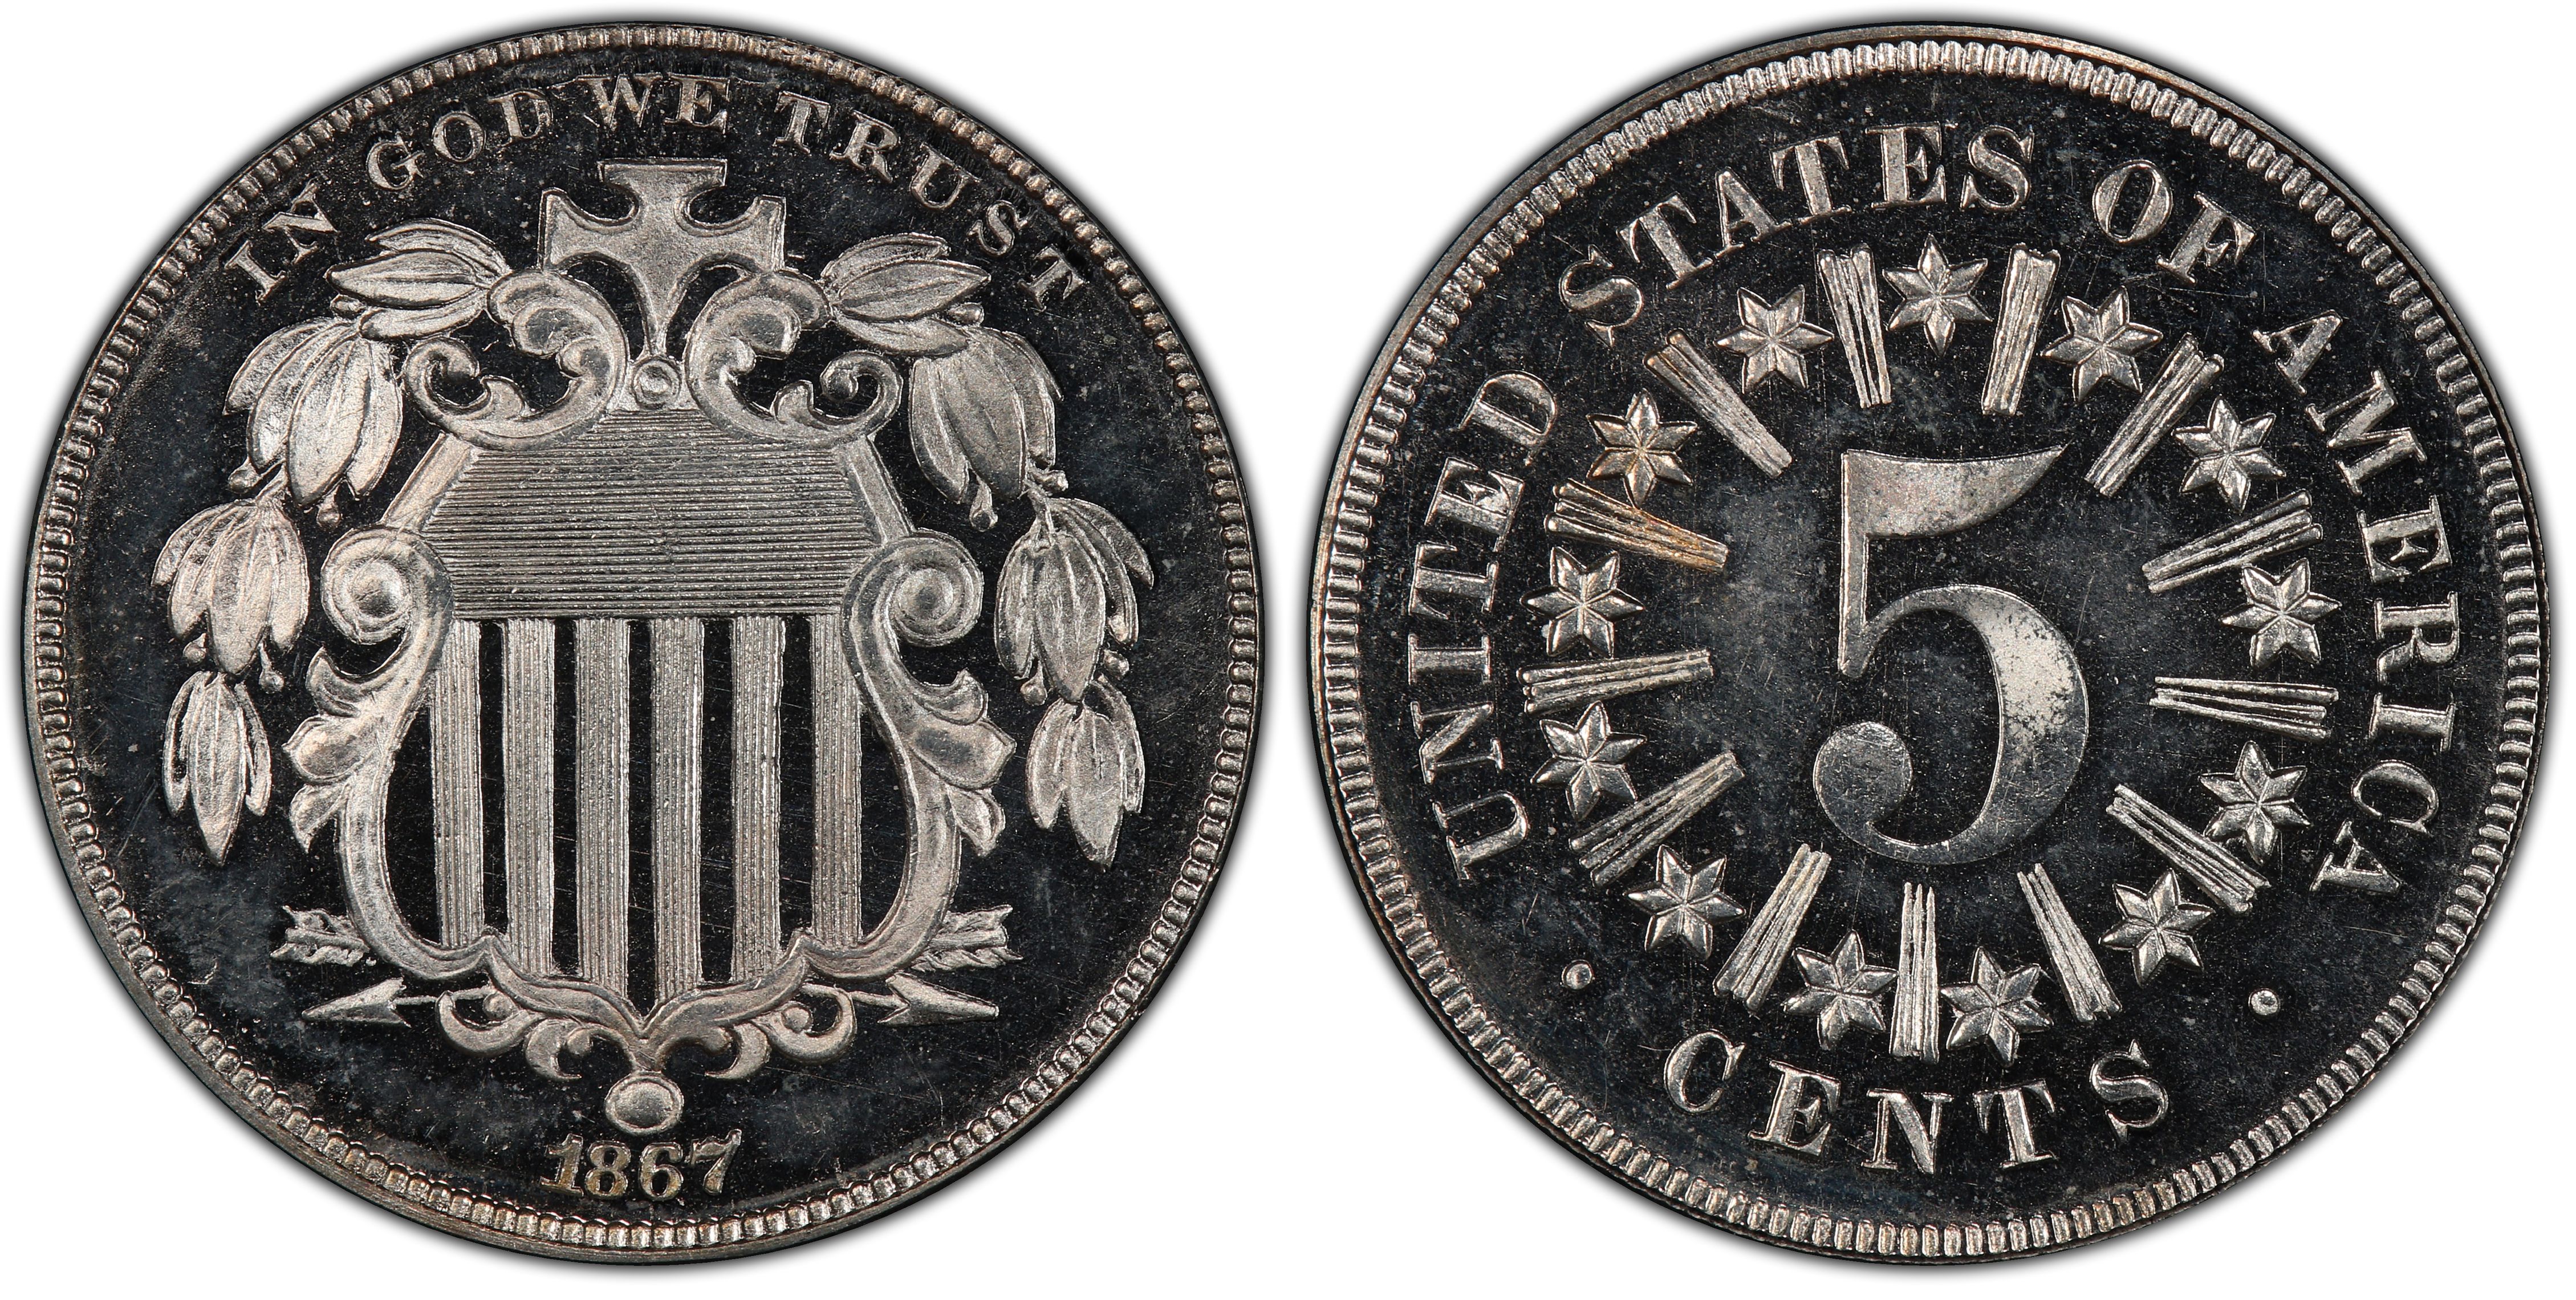 1867 5C Rays, CA (Proof) - PCGS CoinFacts